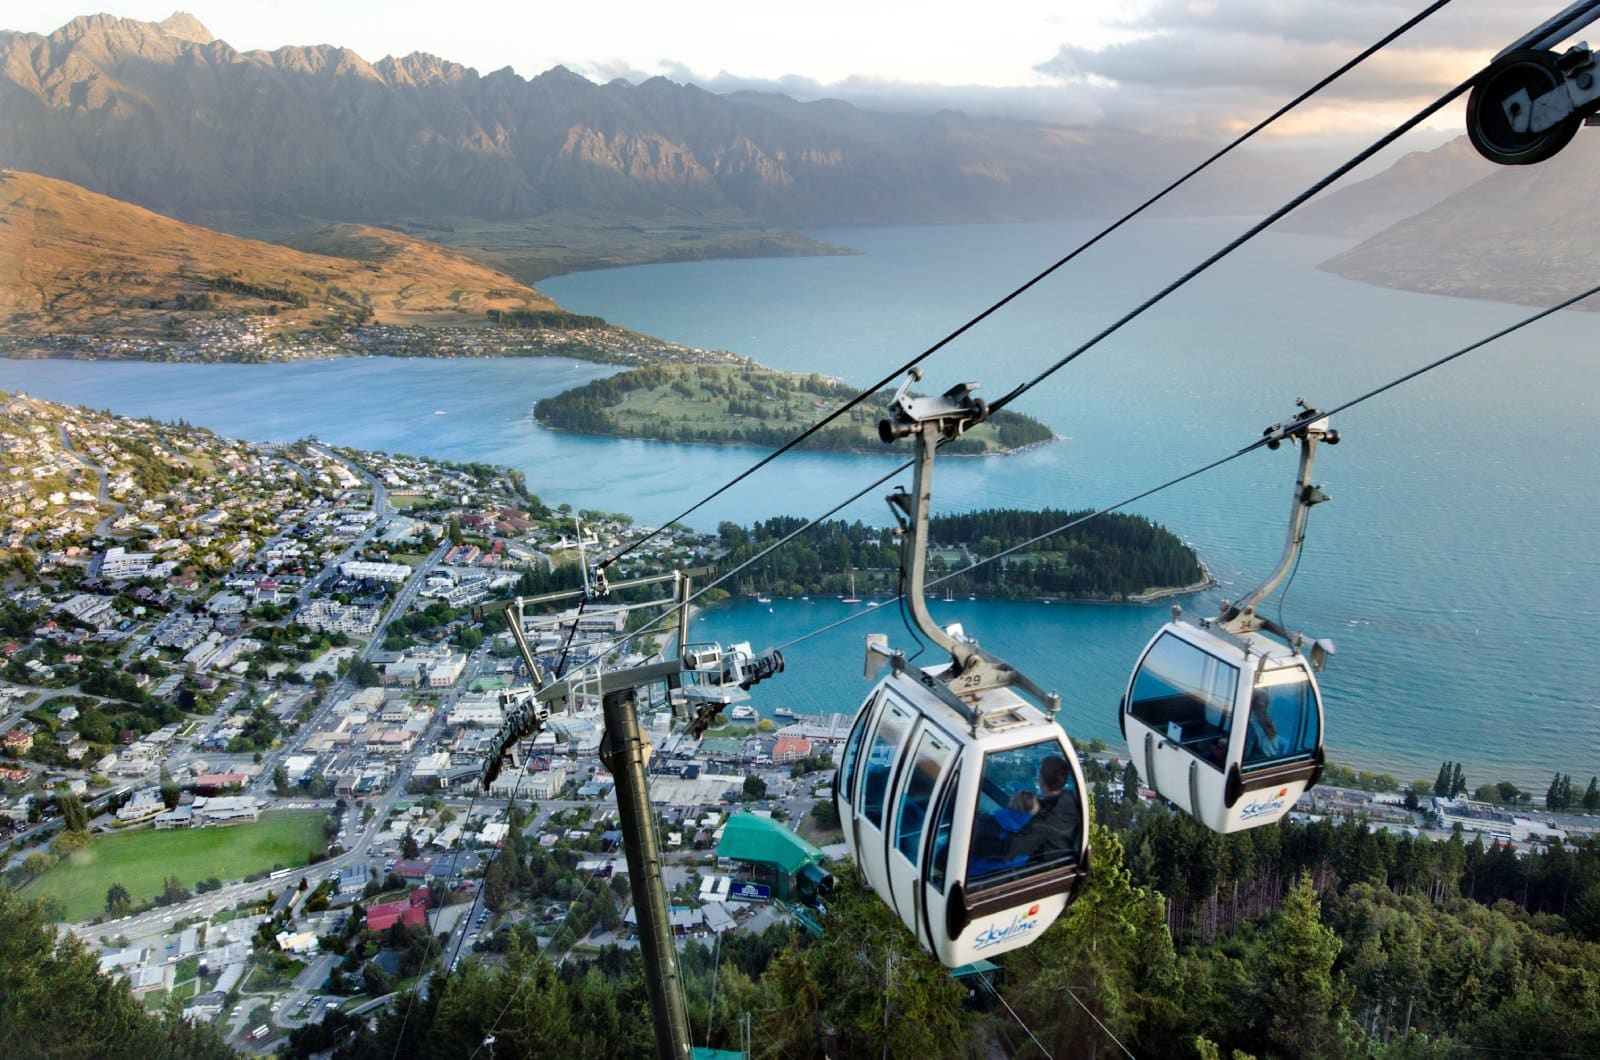 <p class="wp-caption-text">Image Credit: Shutterstock / ChameleonsEye</p>  <p>In New Zealand, local communities in adventure hubs like Queenstown find that American thrill-seekers often come with little respect for the natural environment they’re so eager to explore.</p>